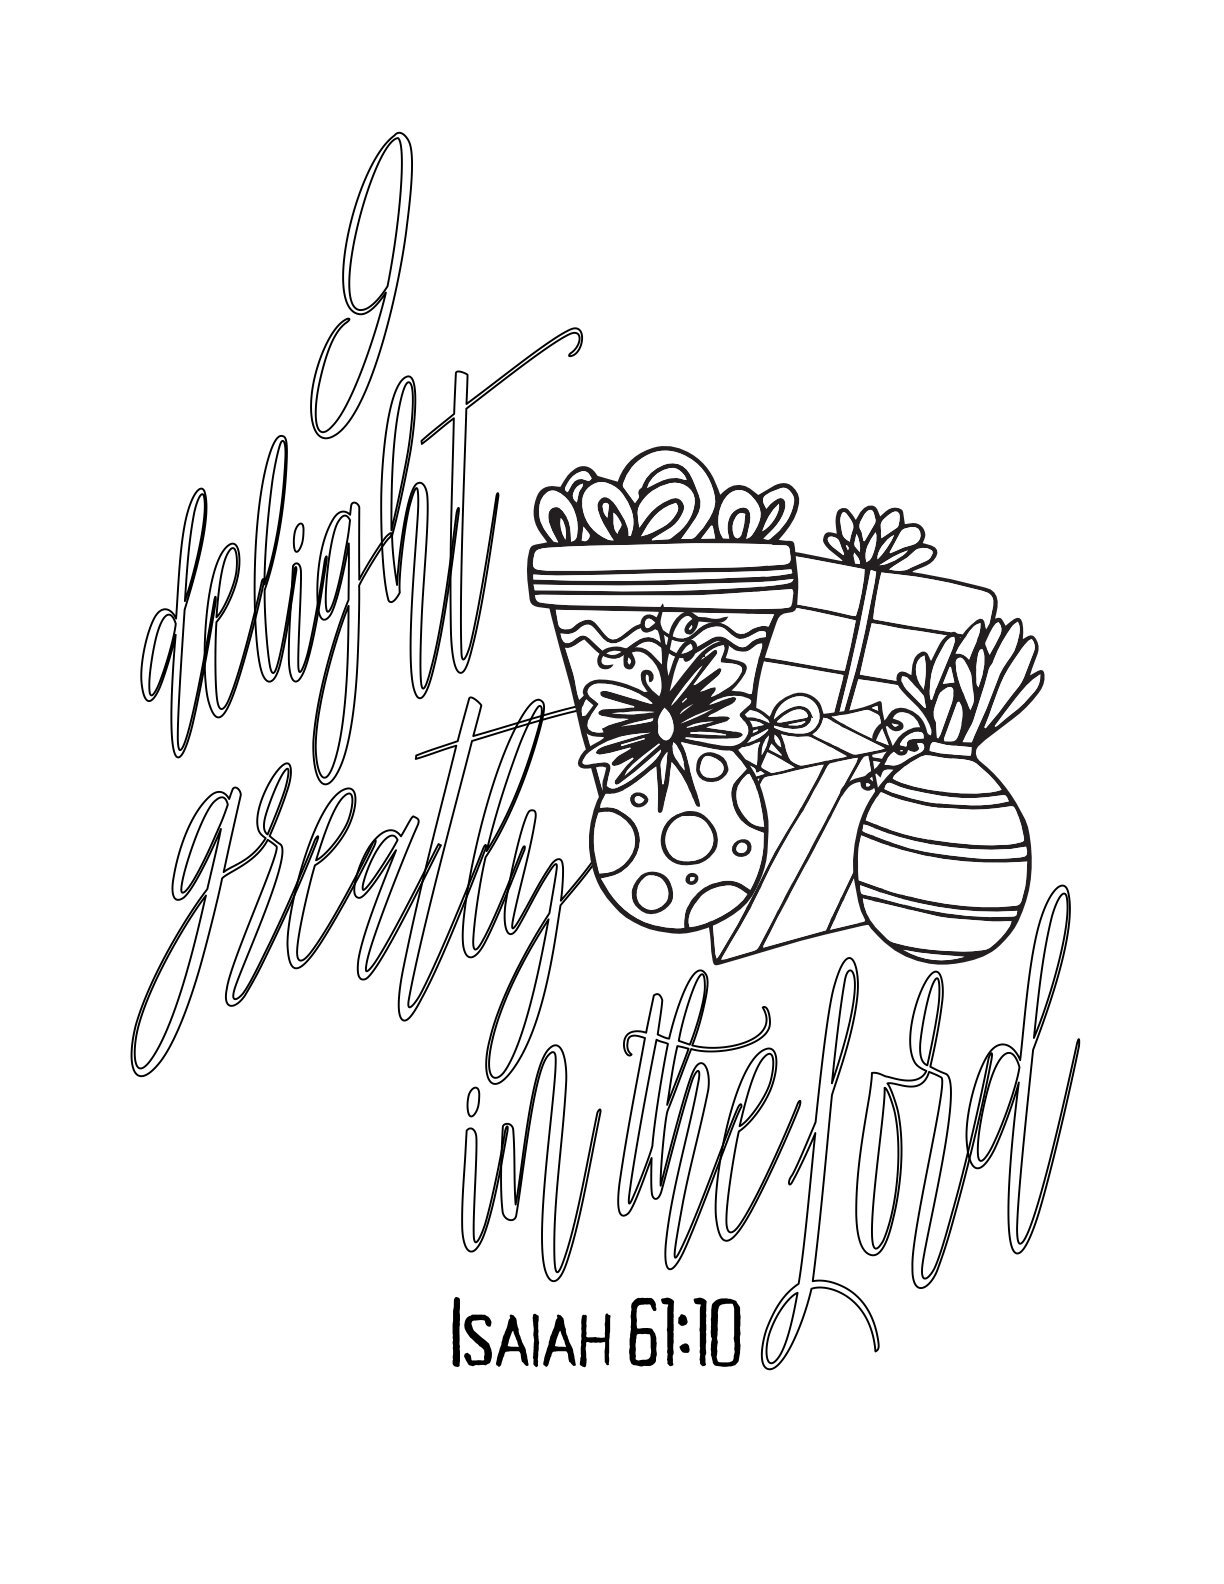 Free Christmas Coloring Page - I Delight Greatly In The Lord - Isaiah 61:10 - Free Advent Printable CLICK HERE TO DOWNLOAD YOUR FREE CHRISTMAS COLORING PAGE